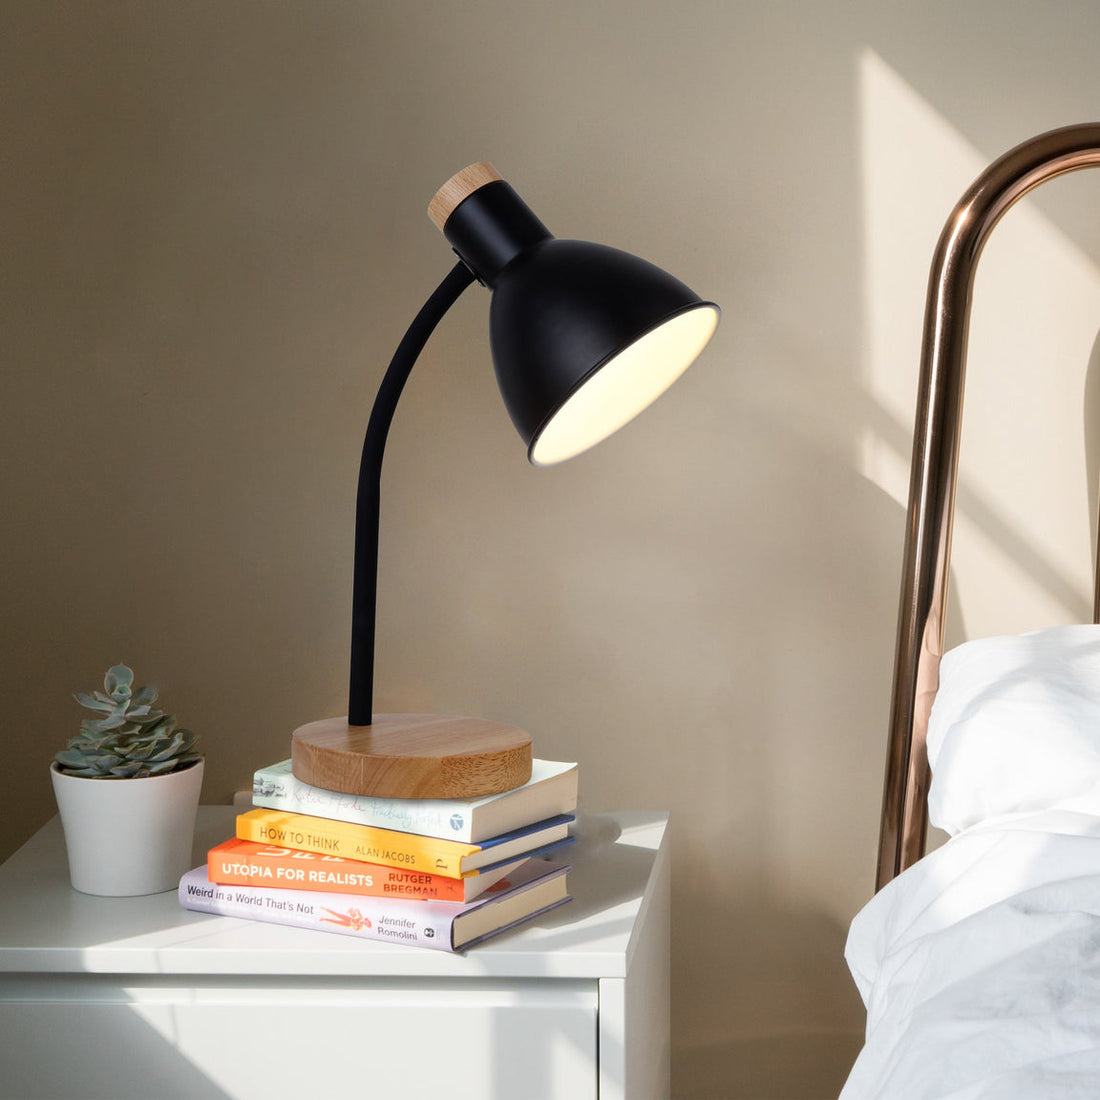 Merete Black and Timber Modern Desk Table Lamp